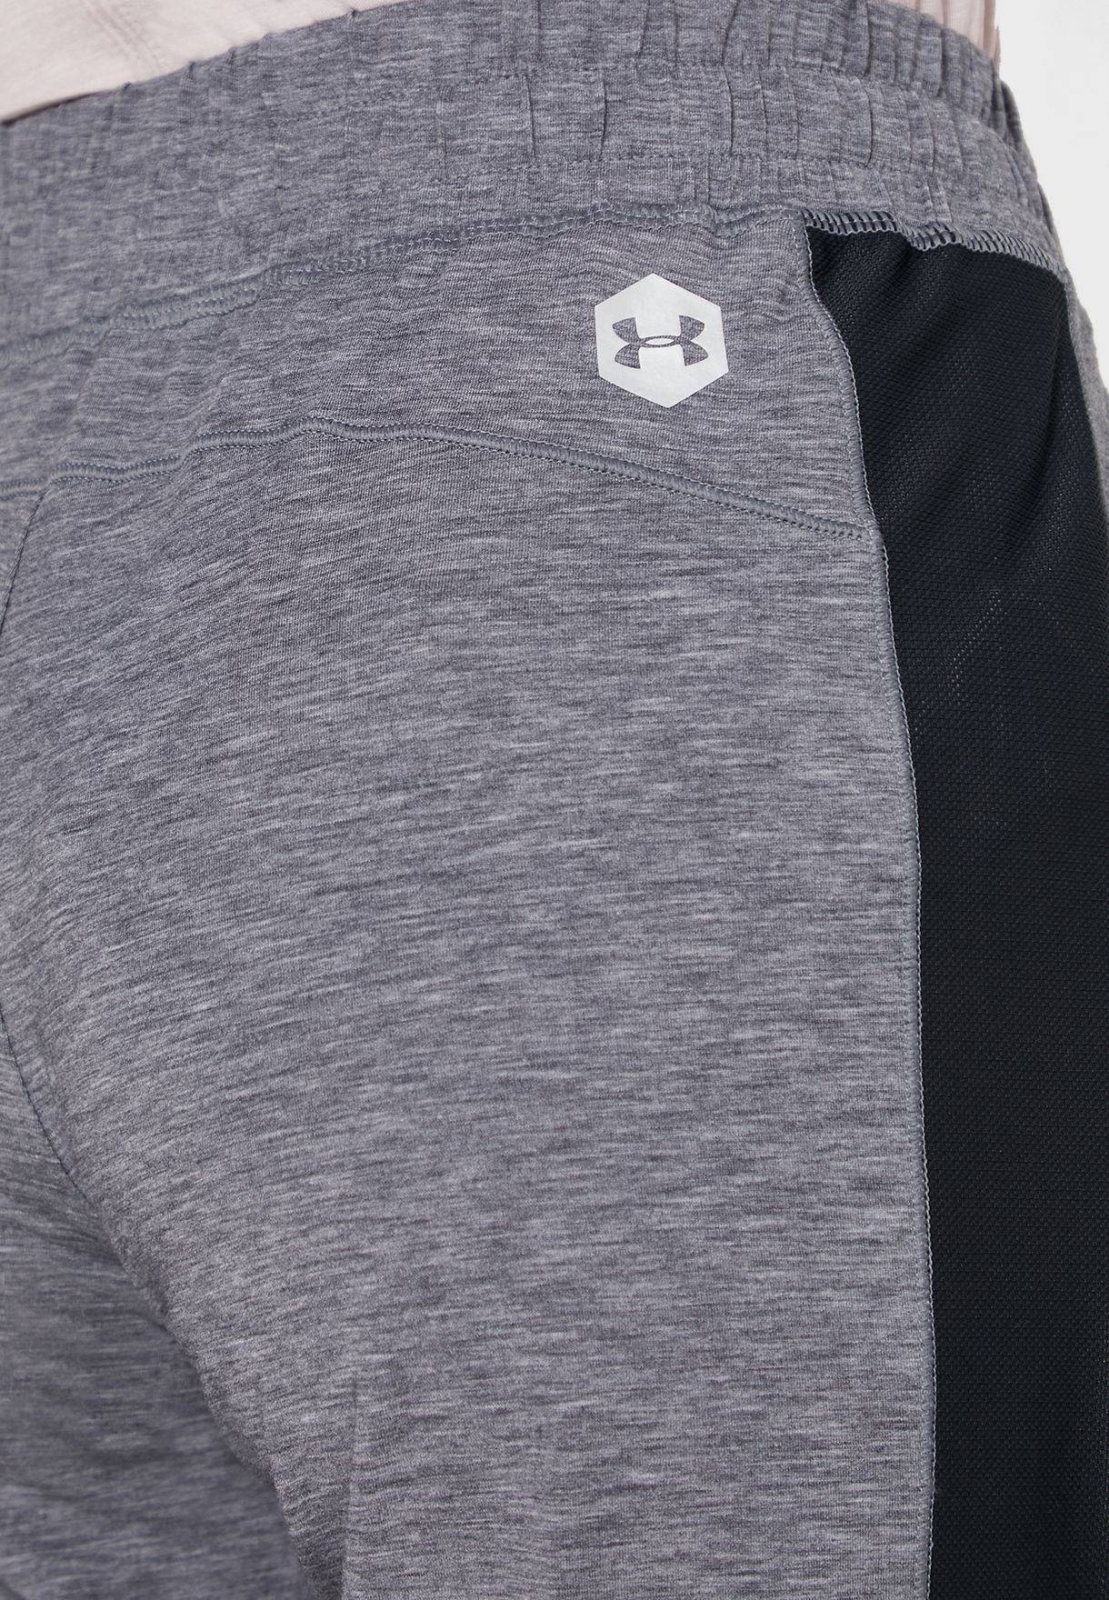 UNDER ARMOUR RECOVERY SLEEPWEAR JOGGER